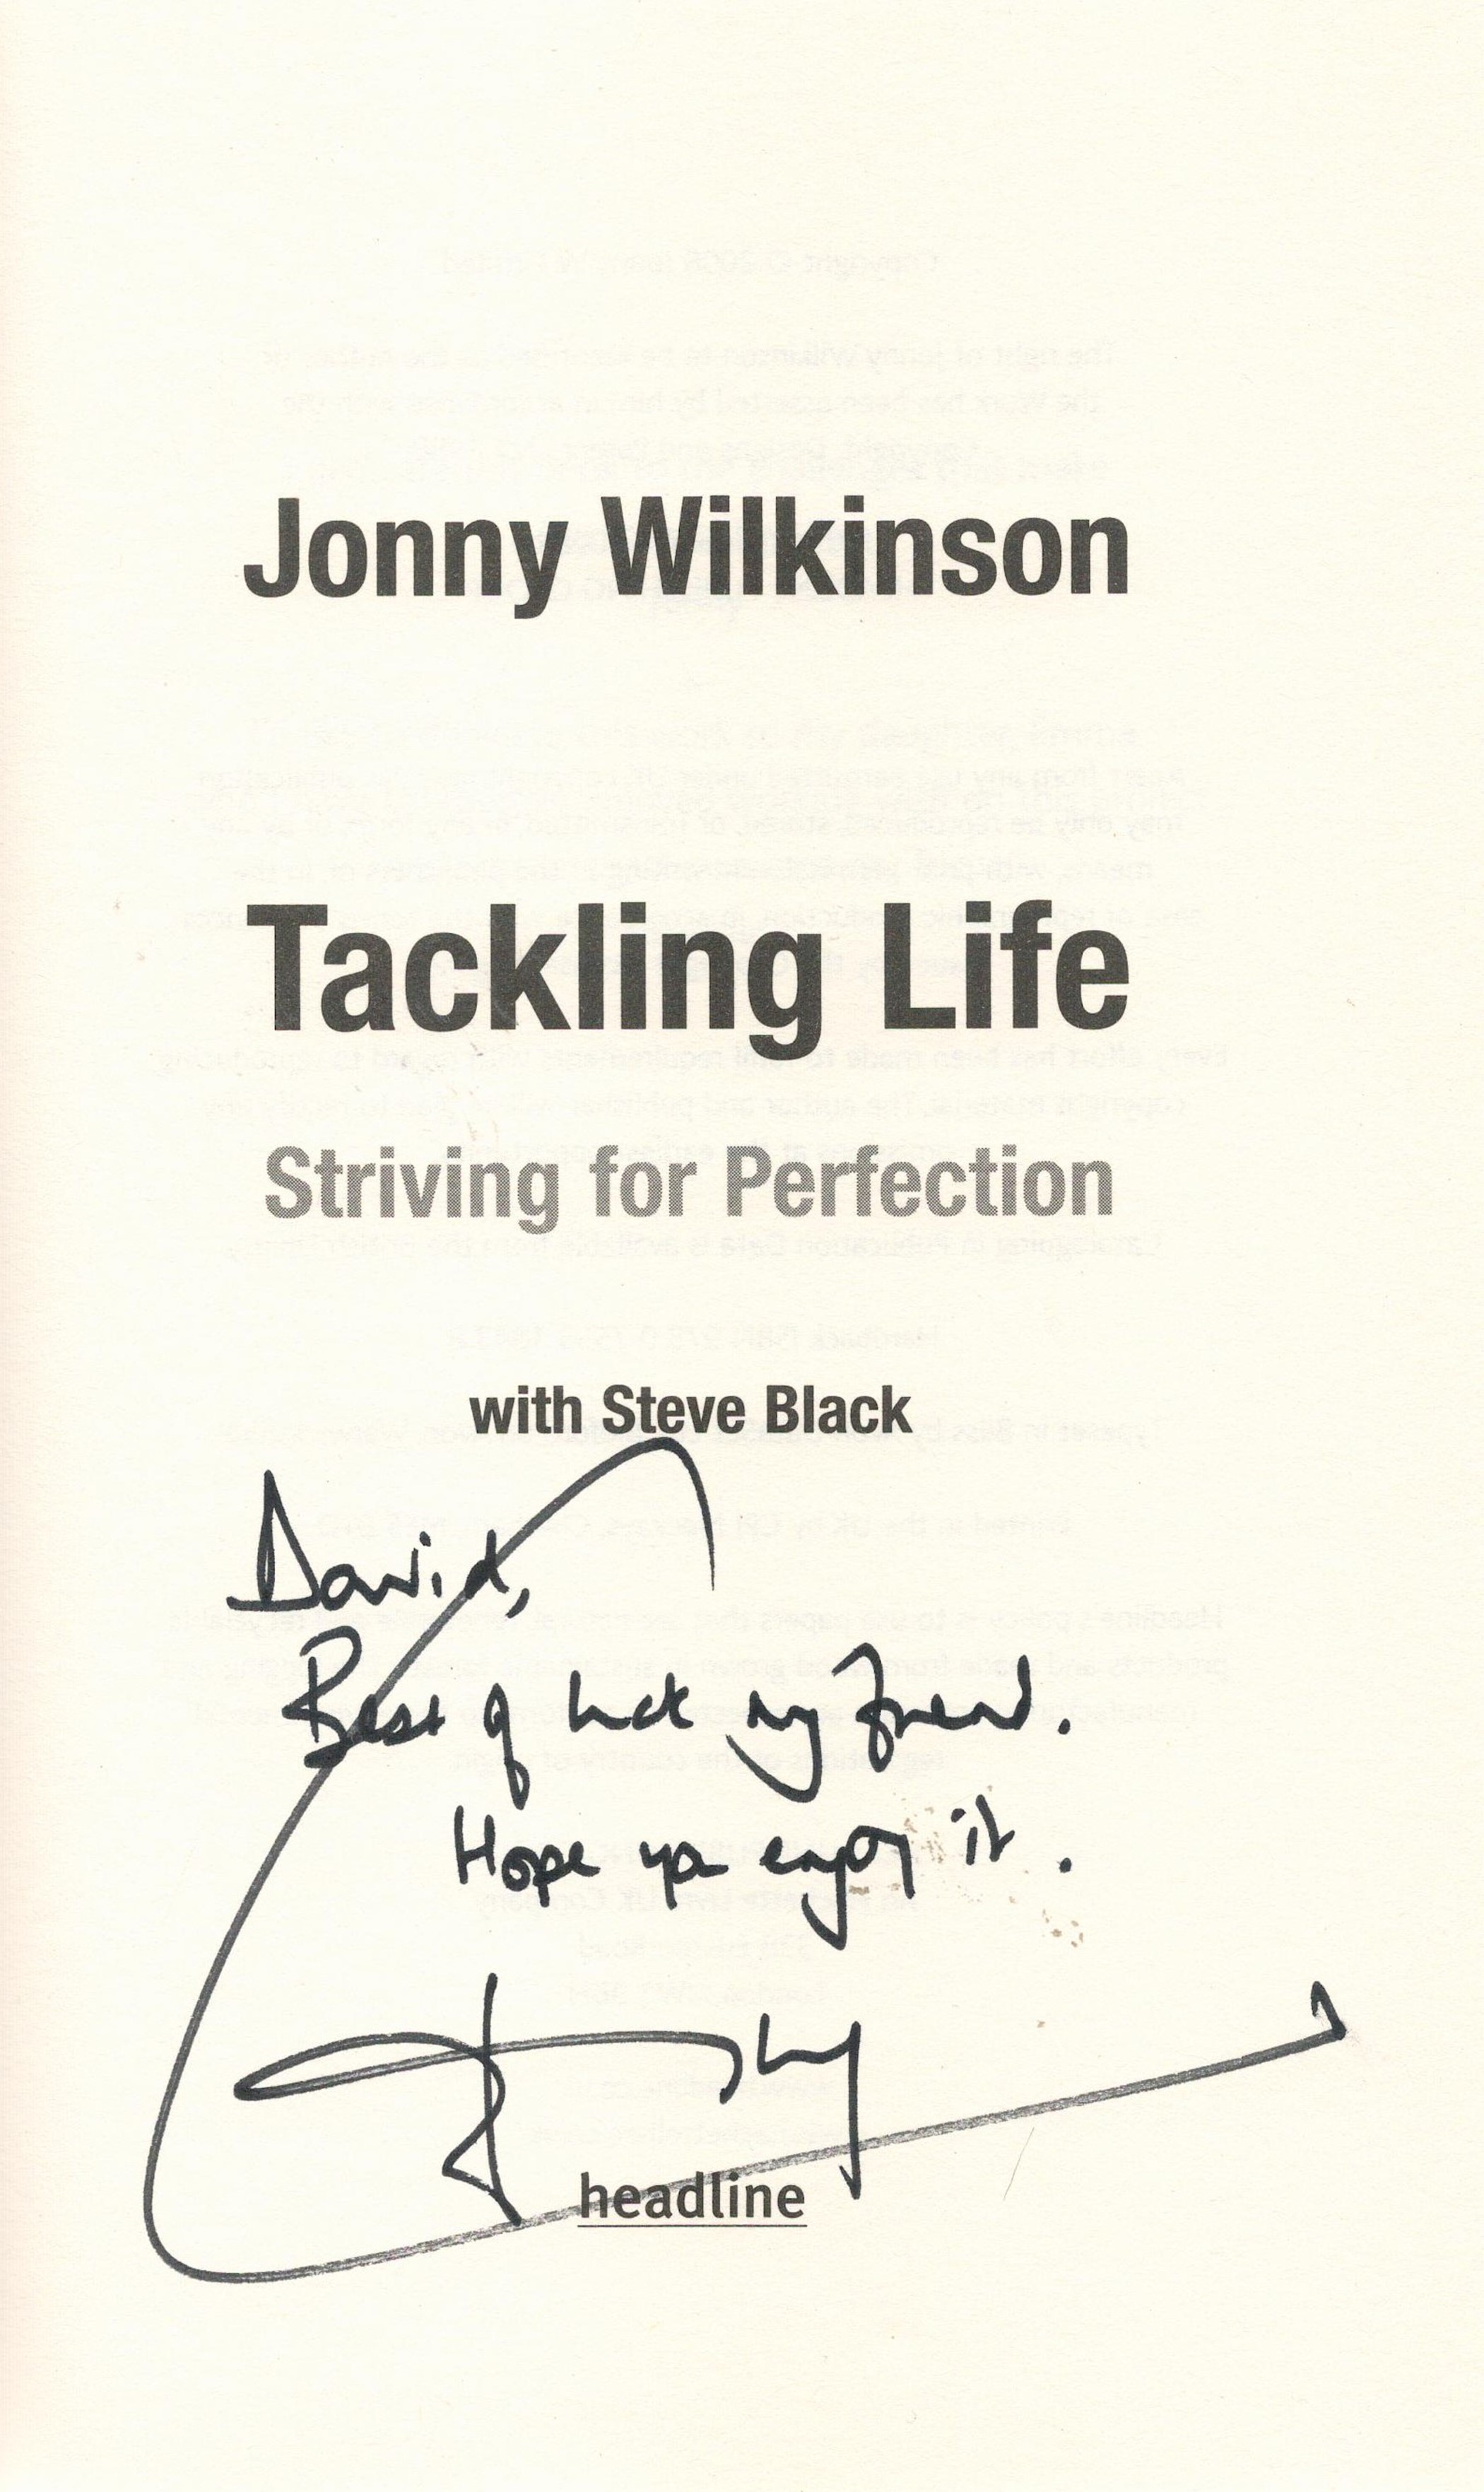 Signed Book Jonny Wilkinson Tackling Life Striving for Perfection First Edition 2008 Hardback Book - Image 2 of 4